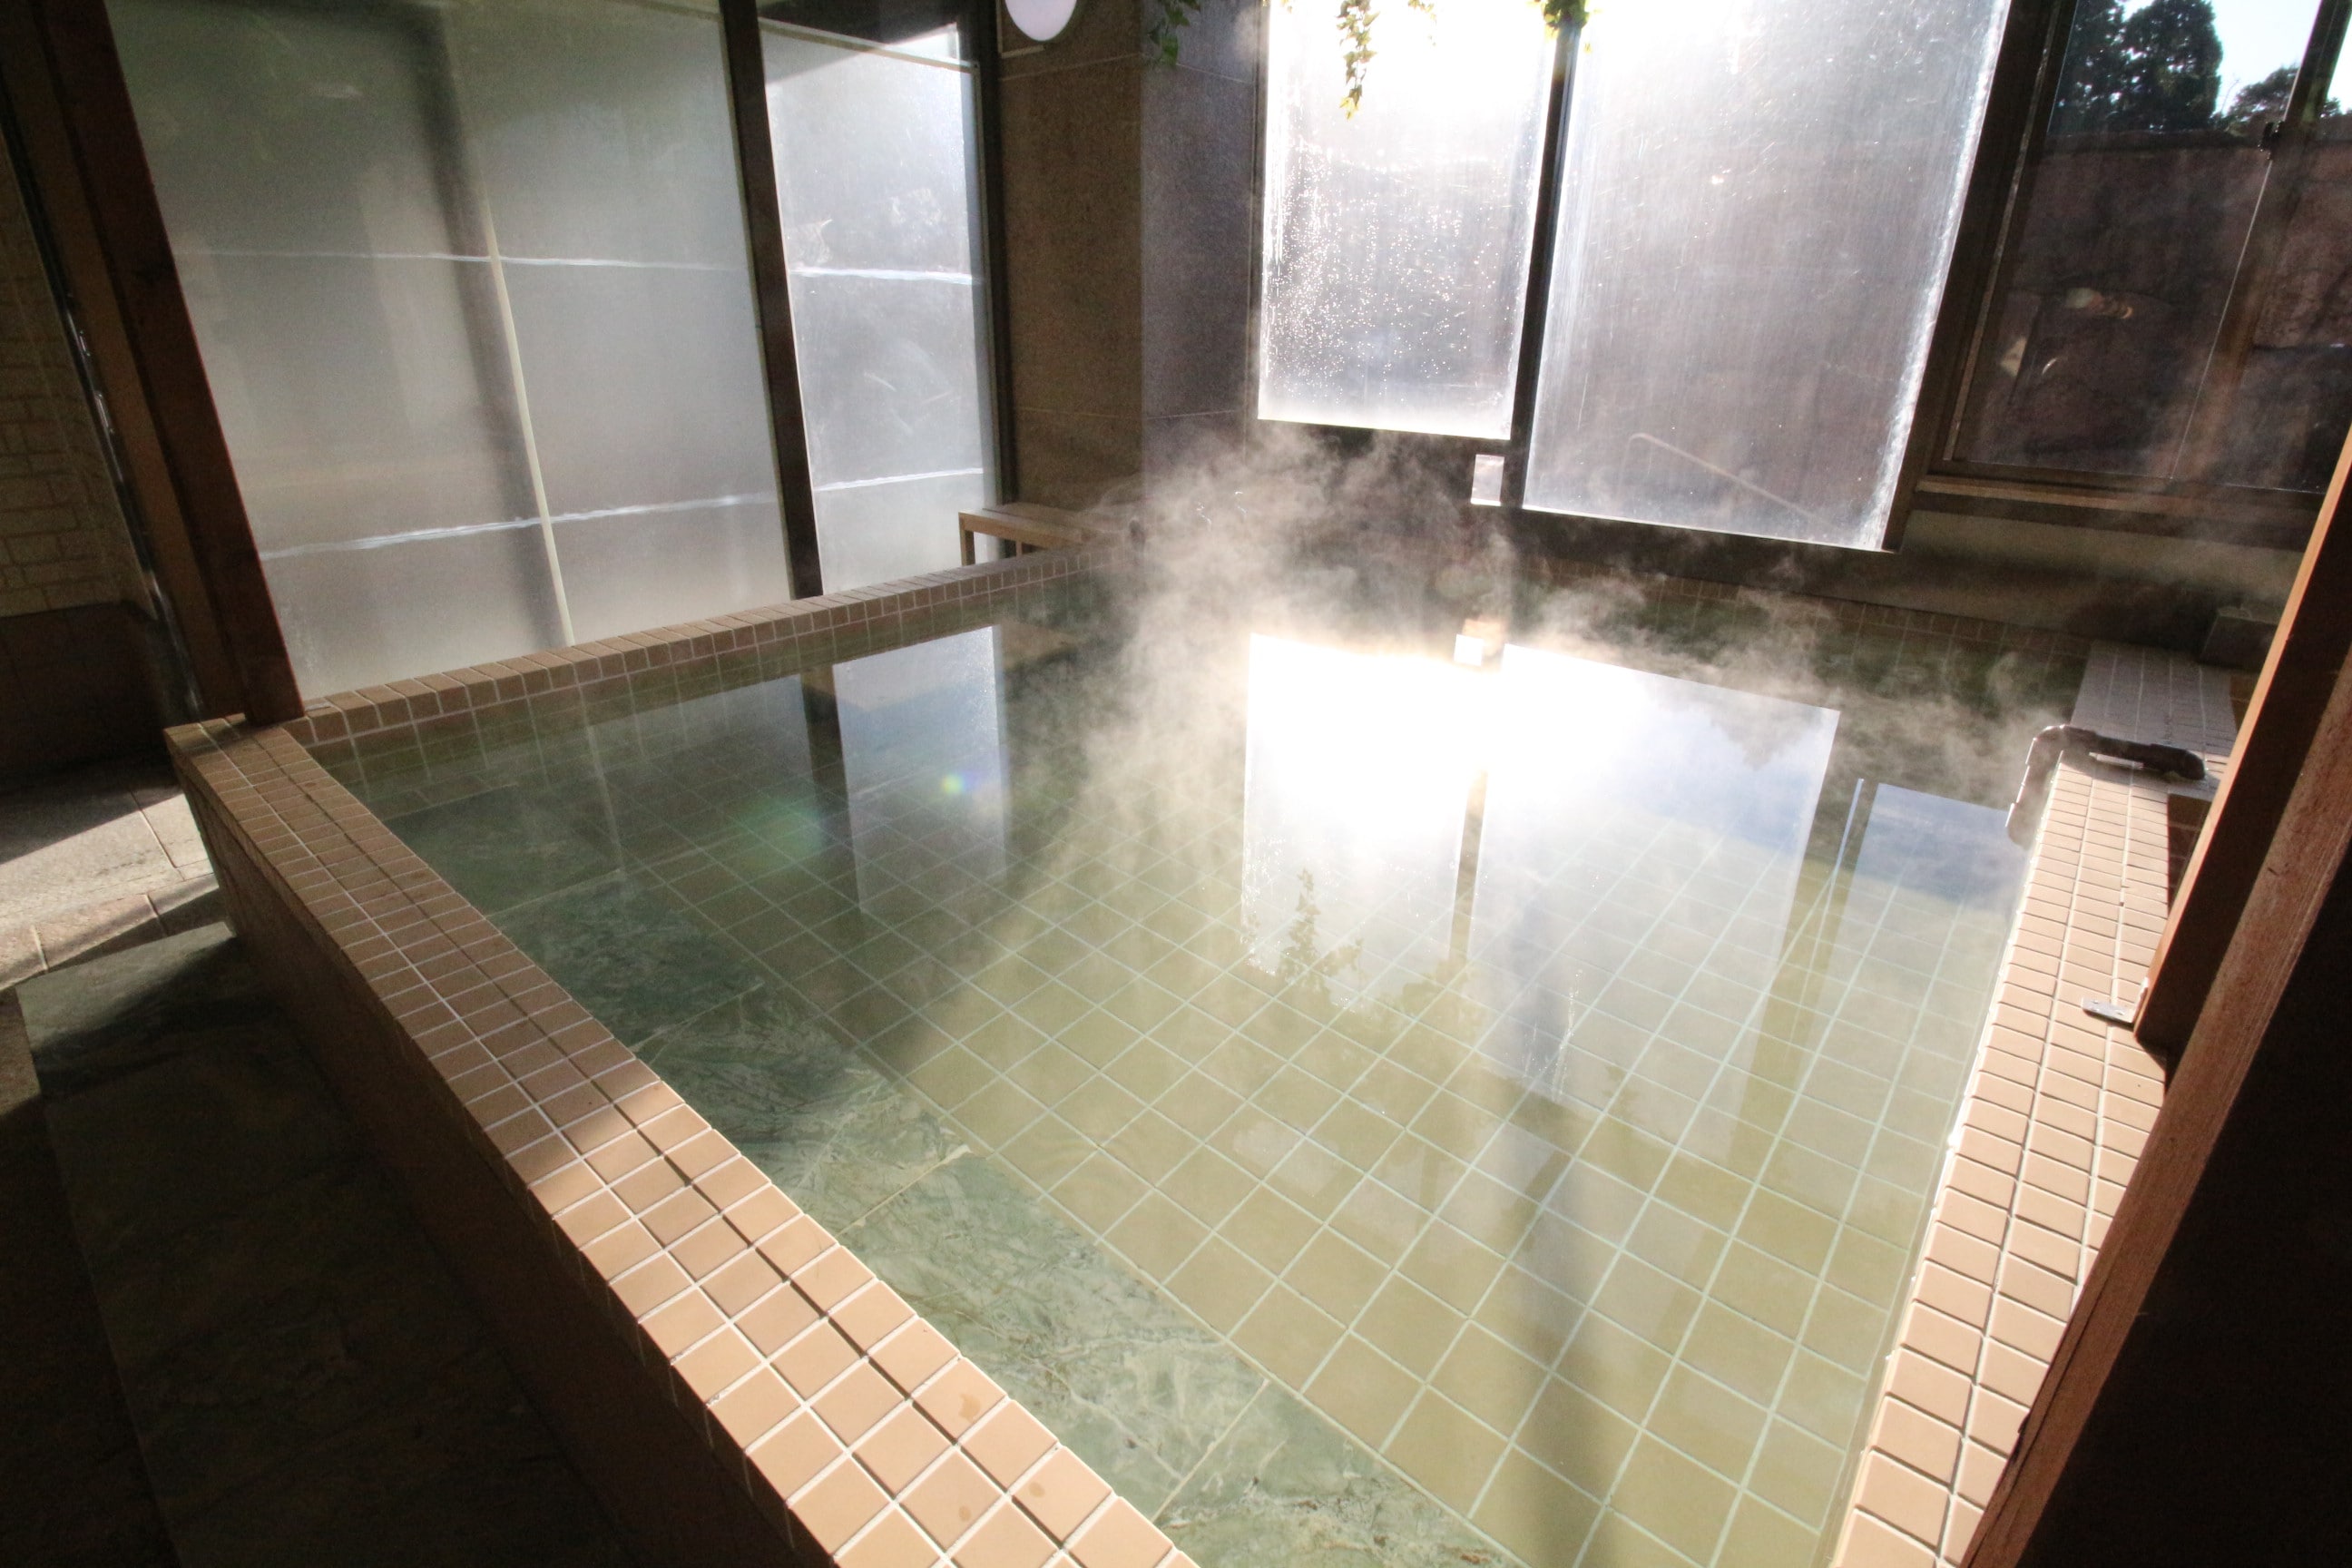 We have a large communal bath. This can also be used as a day trip hot spring for the general public.